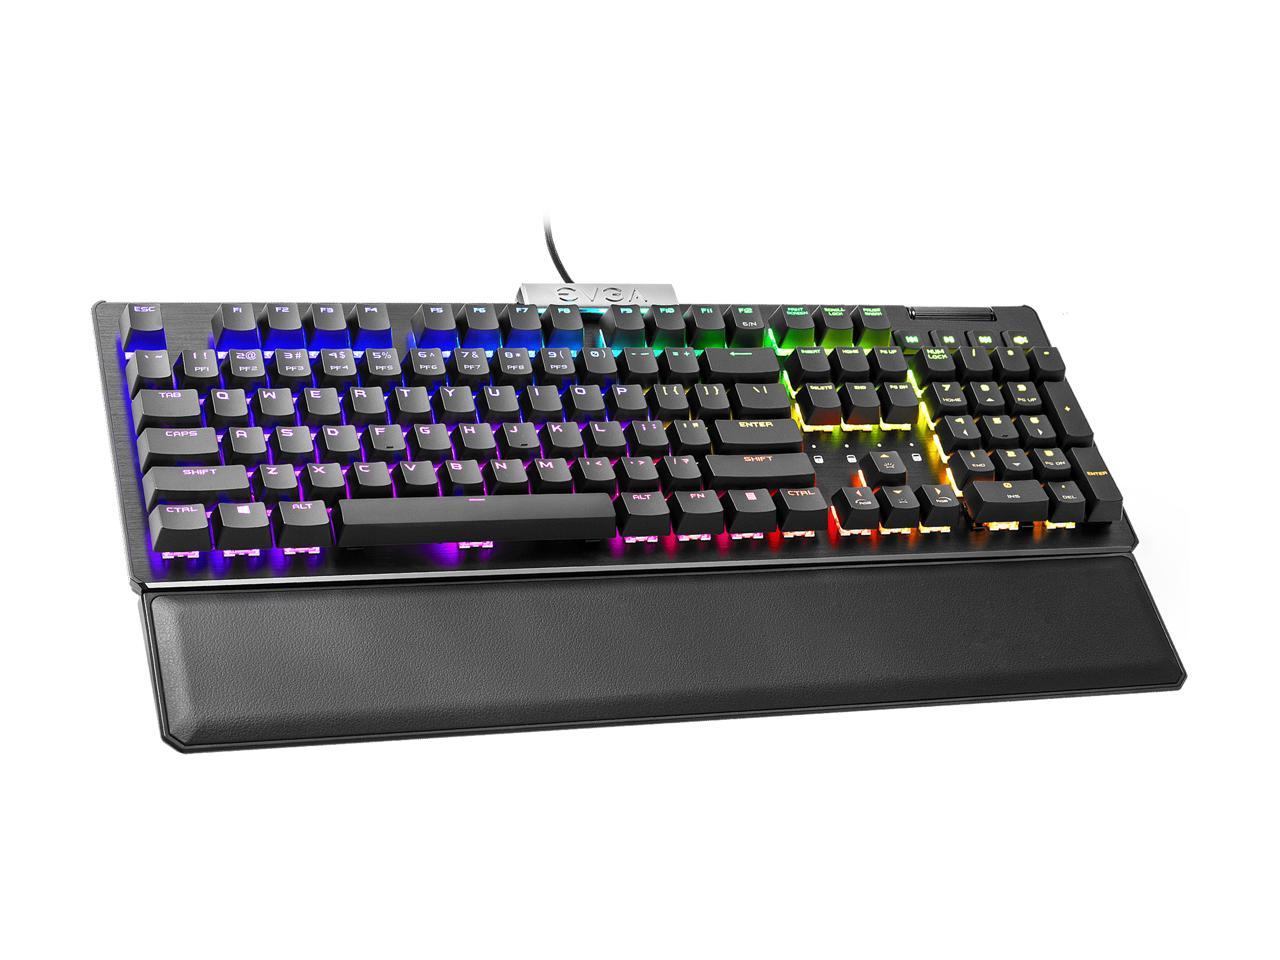 EVGA Z15 RGB Mechanical Gaming Keyboard, Clicky Switch, RGB Backlit LED, Hot Swappable Kailh Speed Bronze Switches 822-W1-15US-KR